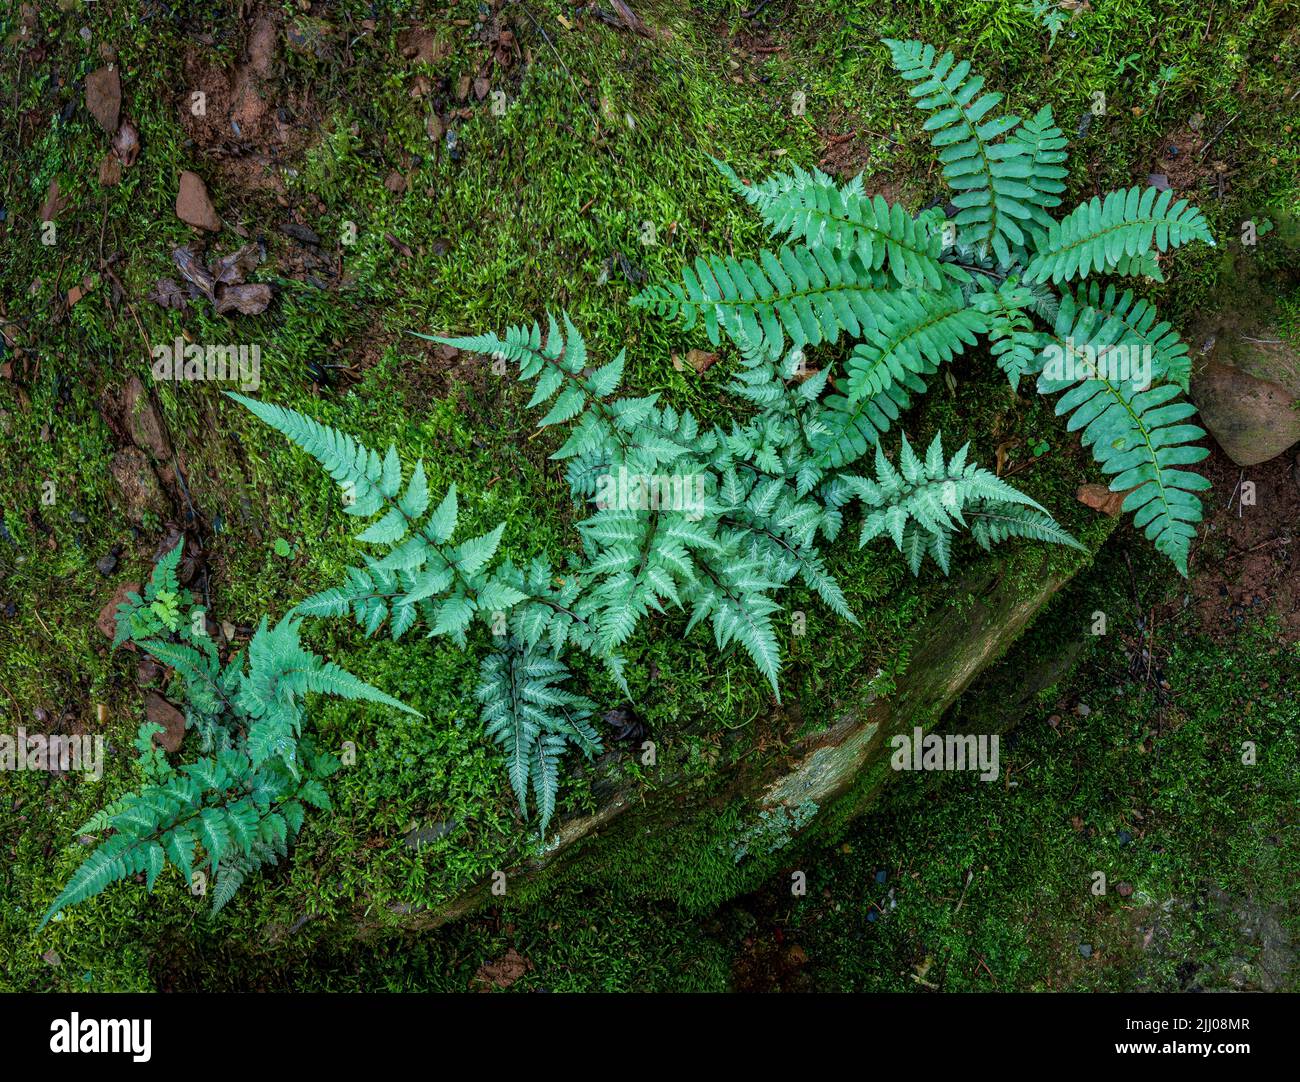 Japanese painted ferns (Athyrium niponicum) and Christmas fern (Polystichum acrostichoides) growing on mossy rocks in Japanese garden in central Virgi Stock Photo